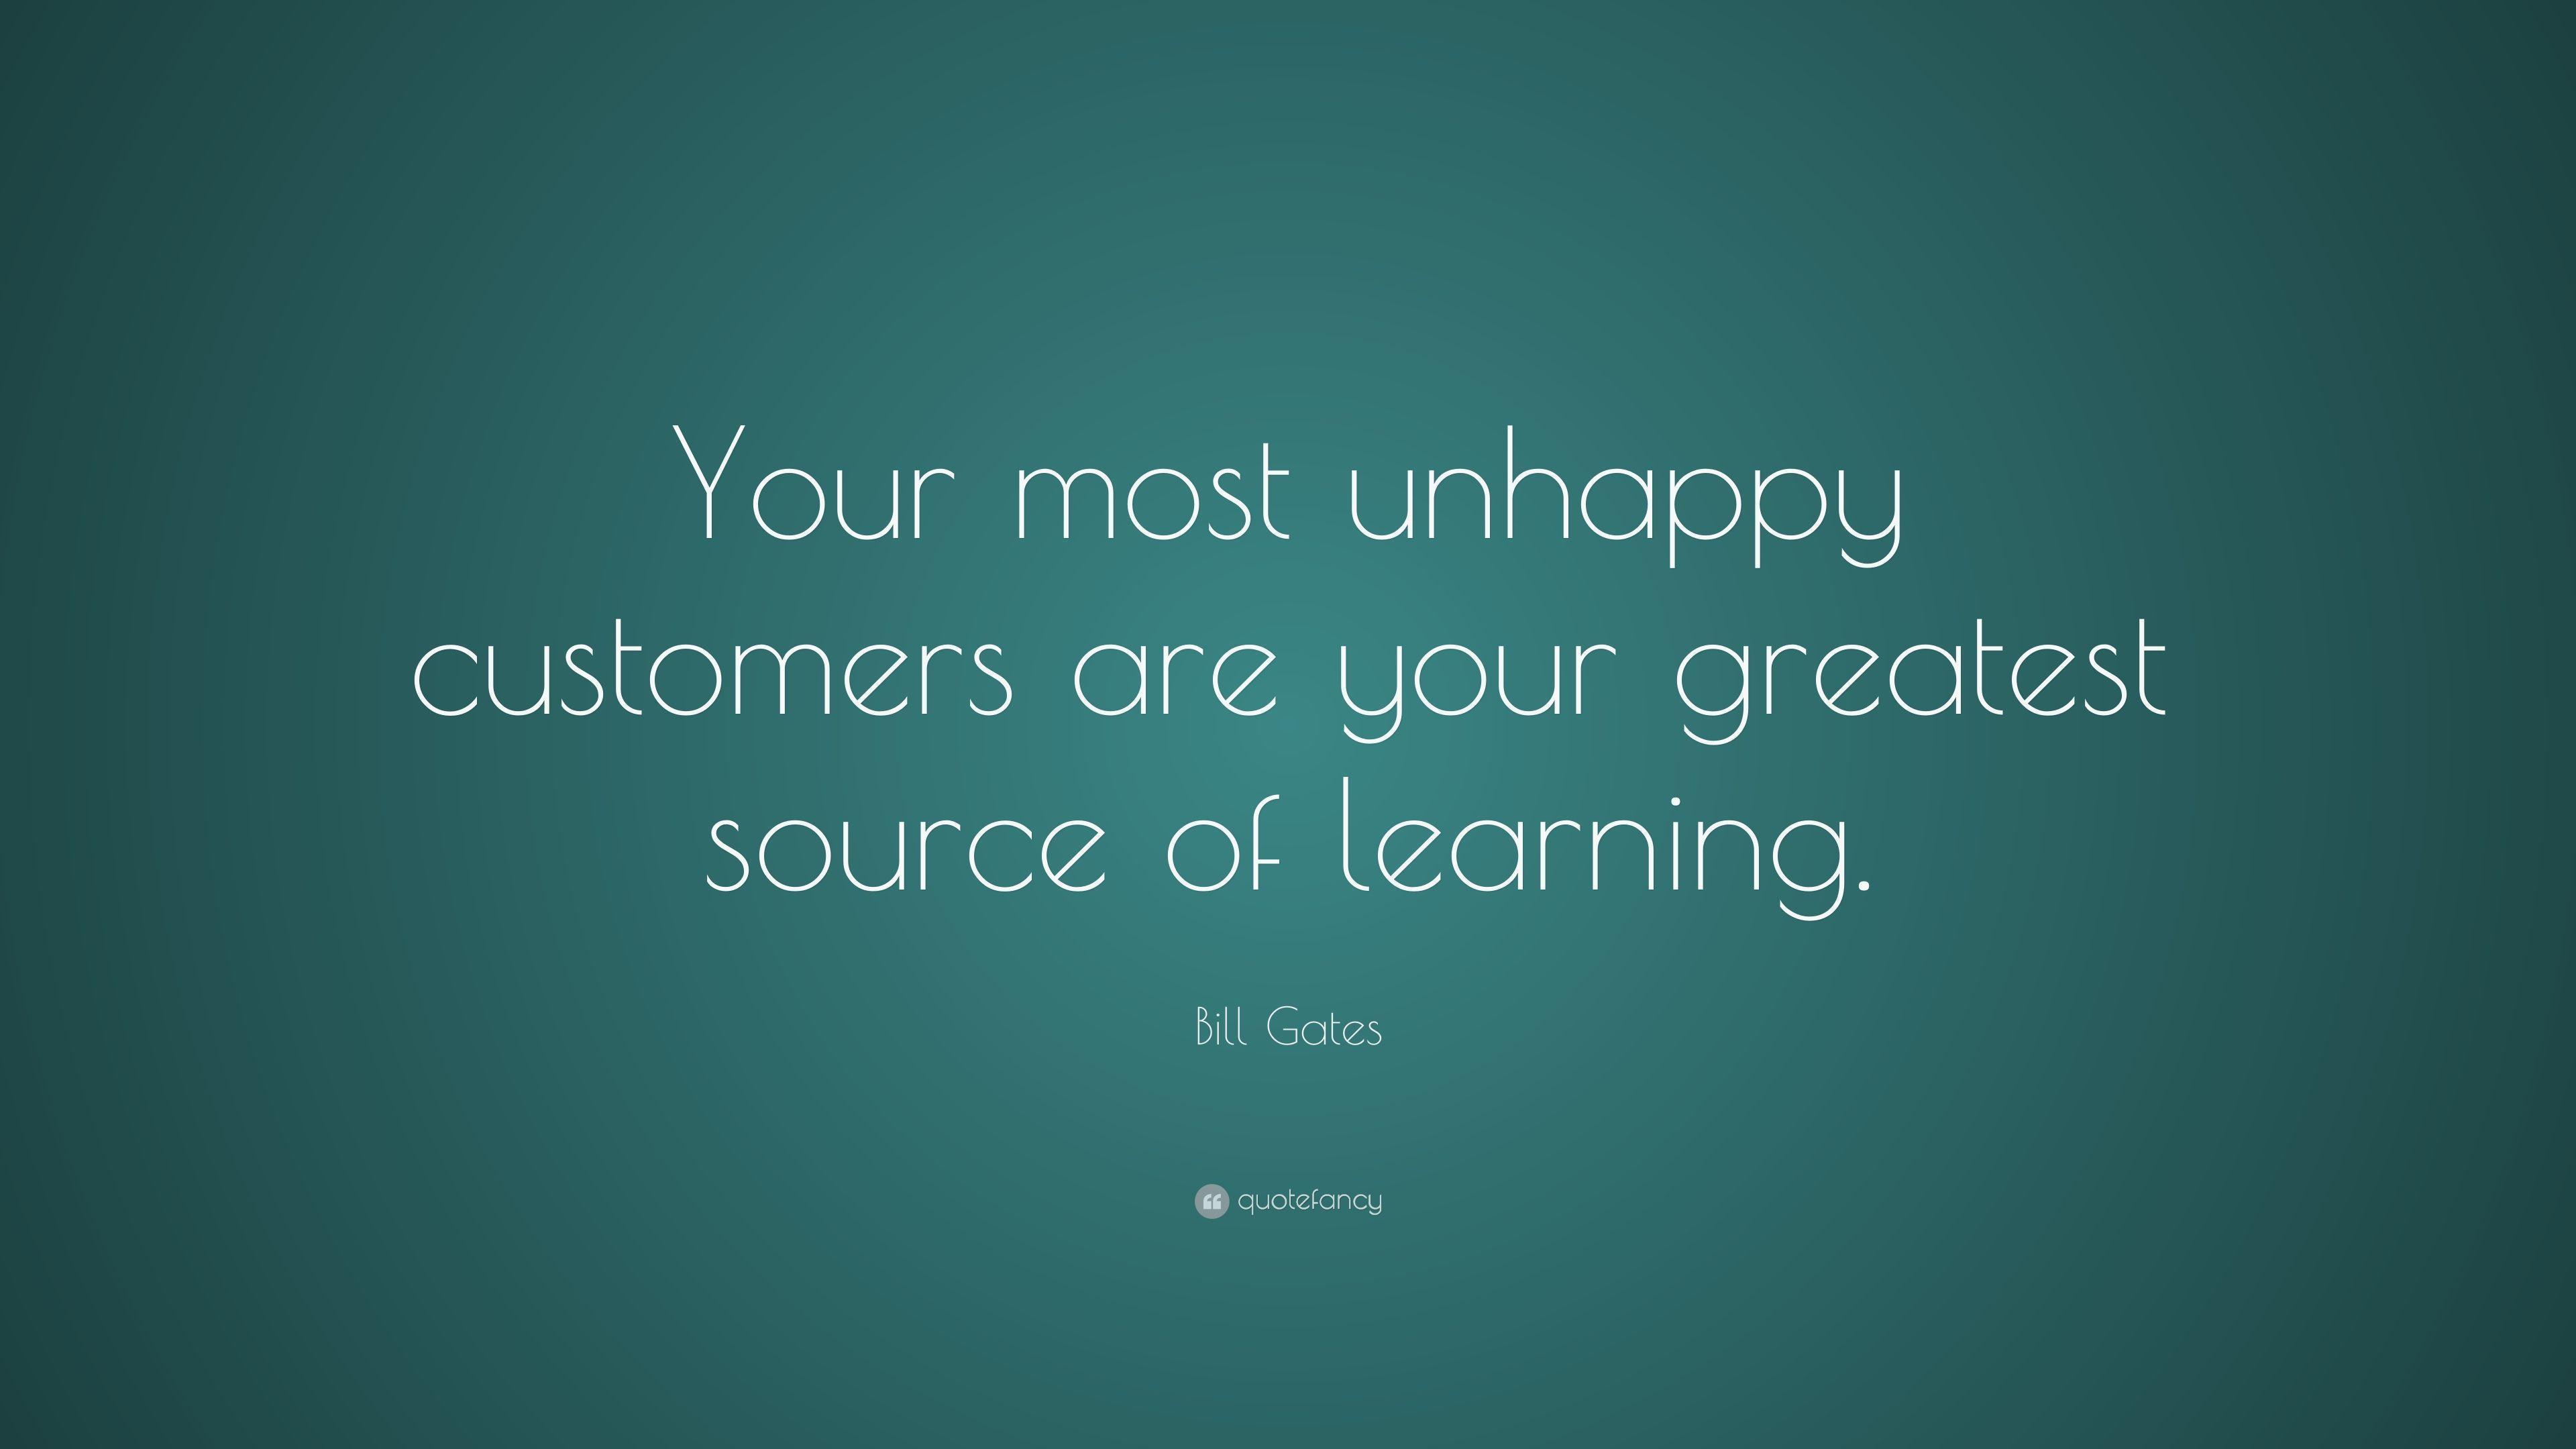 Bill Gates Quote: “Your most unhappy customers are your greatest